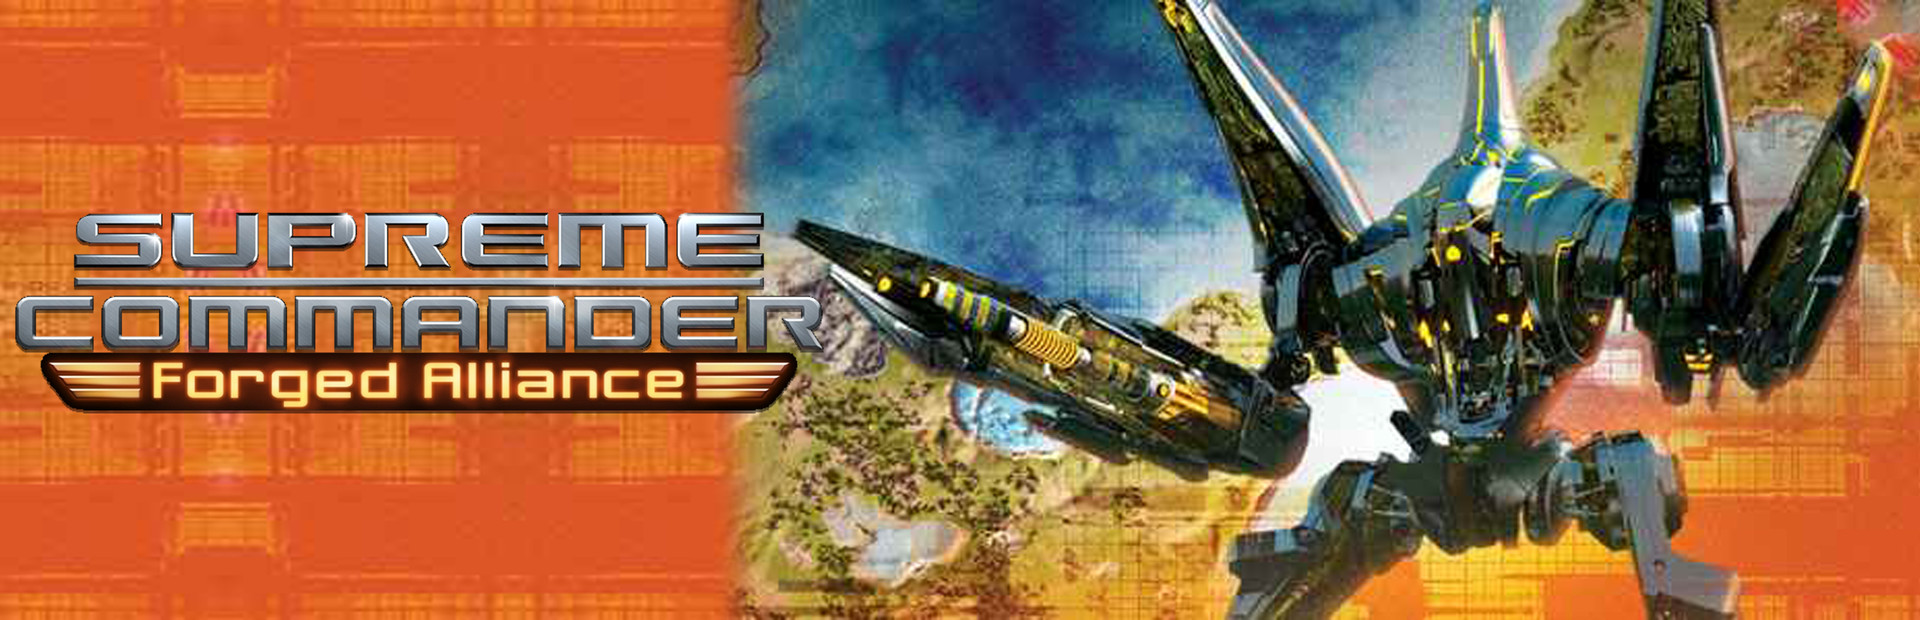 Supreme Commander: Forged Alliance cover image